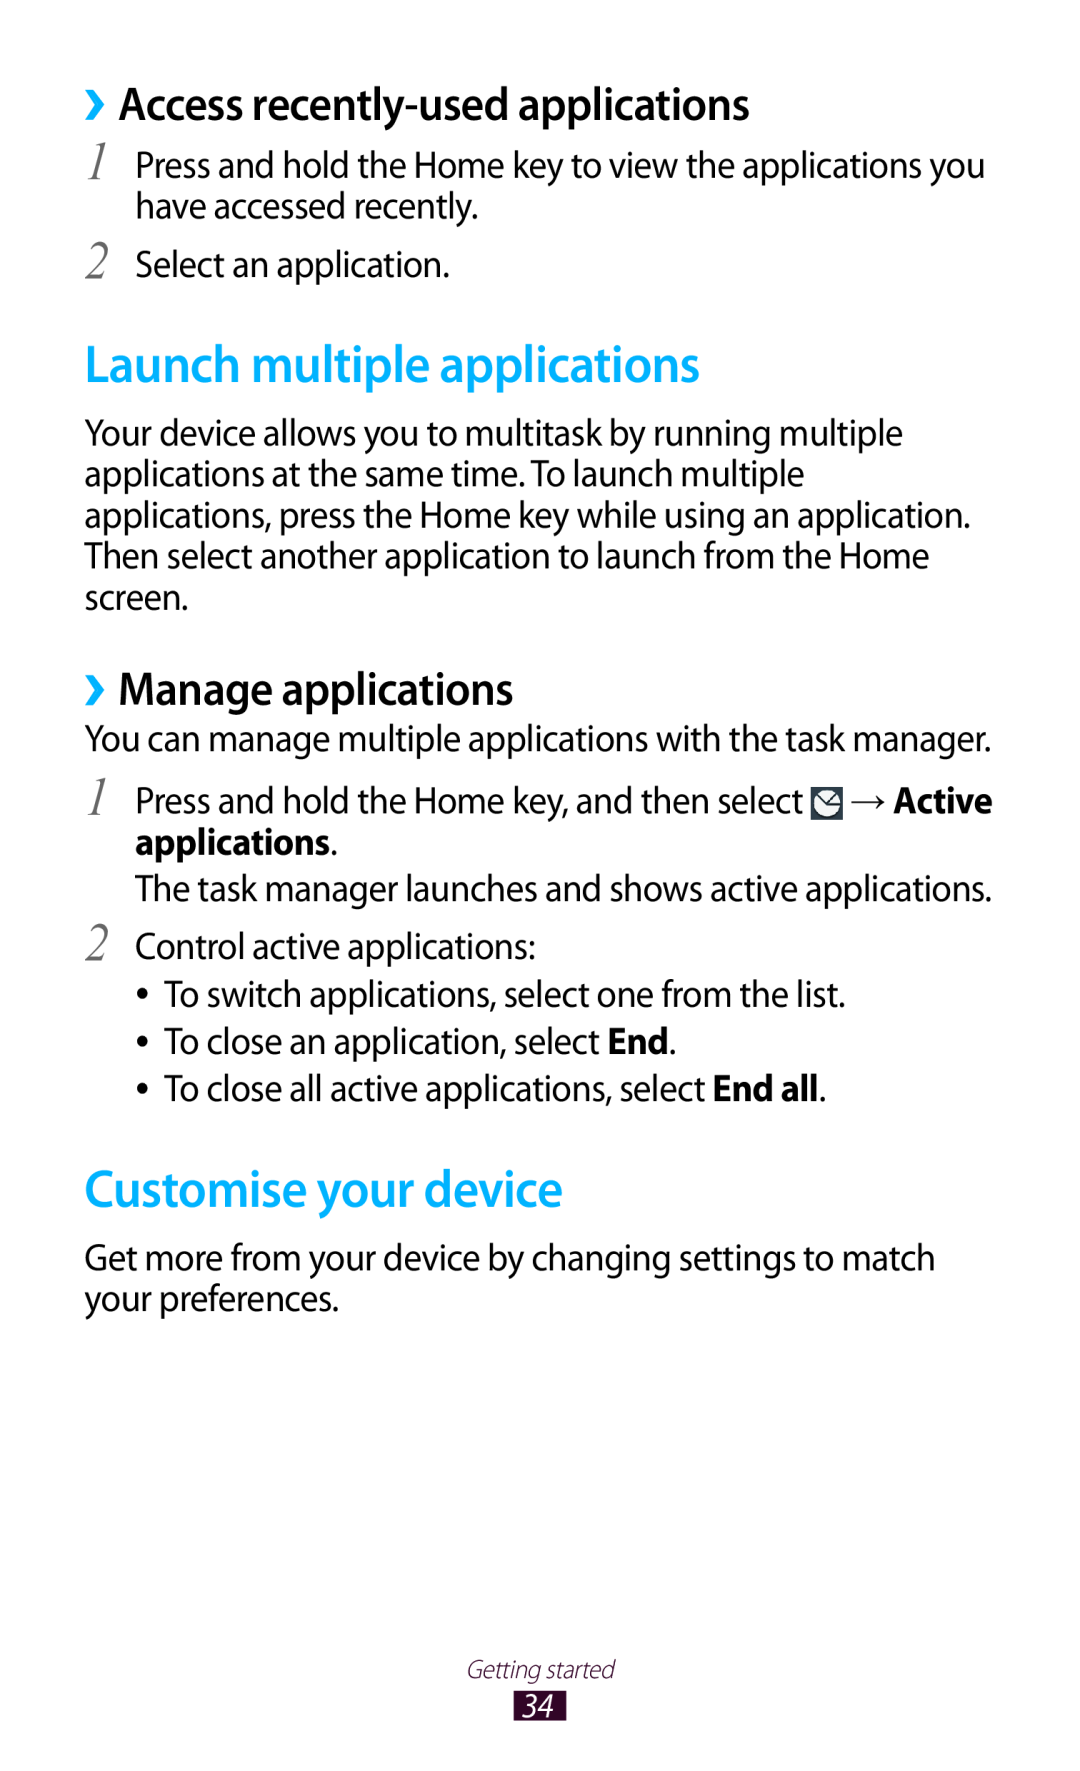 Samsung GT-I8160OKASEB manual Launch multiple applications, Customise your device, ››Access recently-used applications 